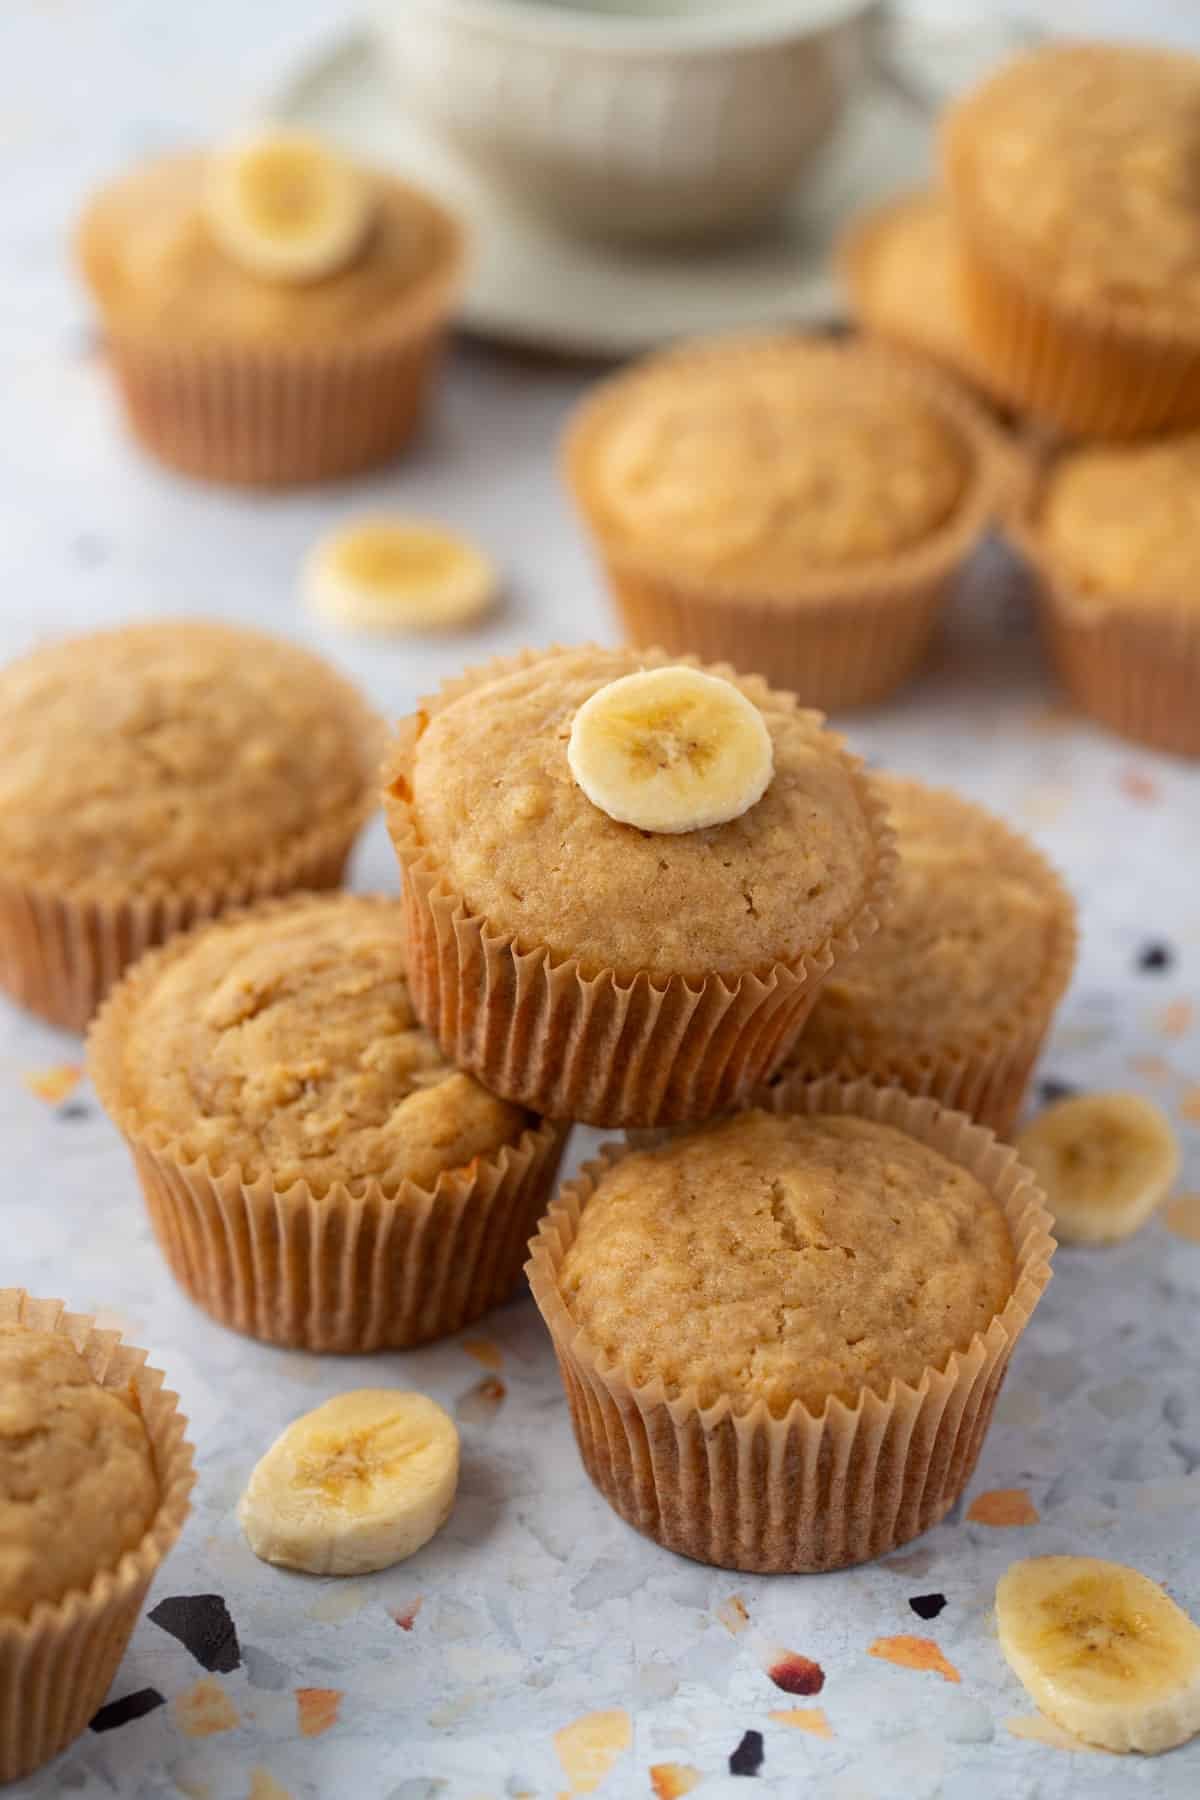 banana muffins in paper cases, arranged on a table with slices of banana.